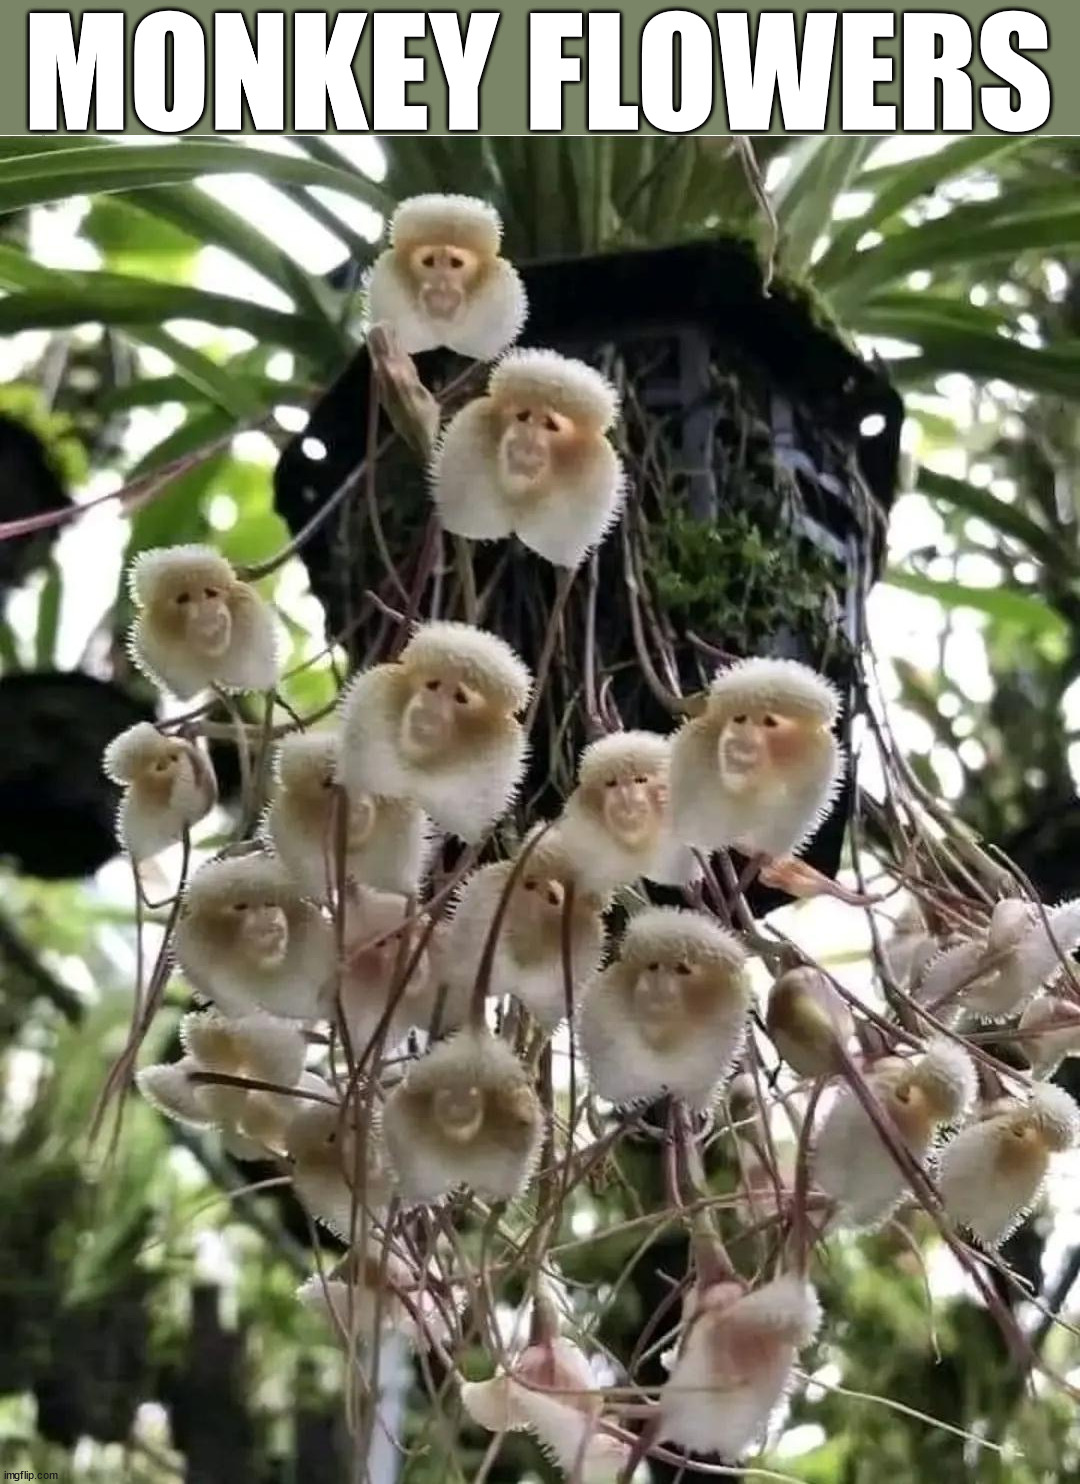 MONKEY FLOWERS | image tagged in wholesome | made w/ Imgflip meme maker